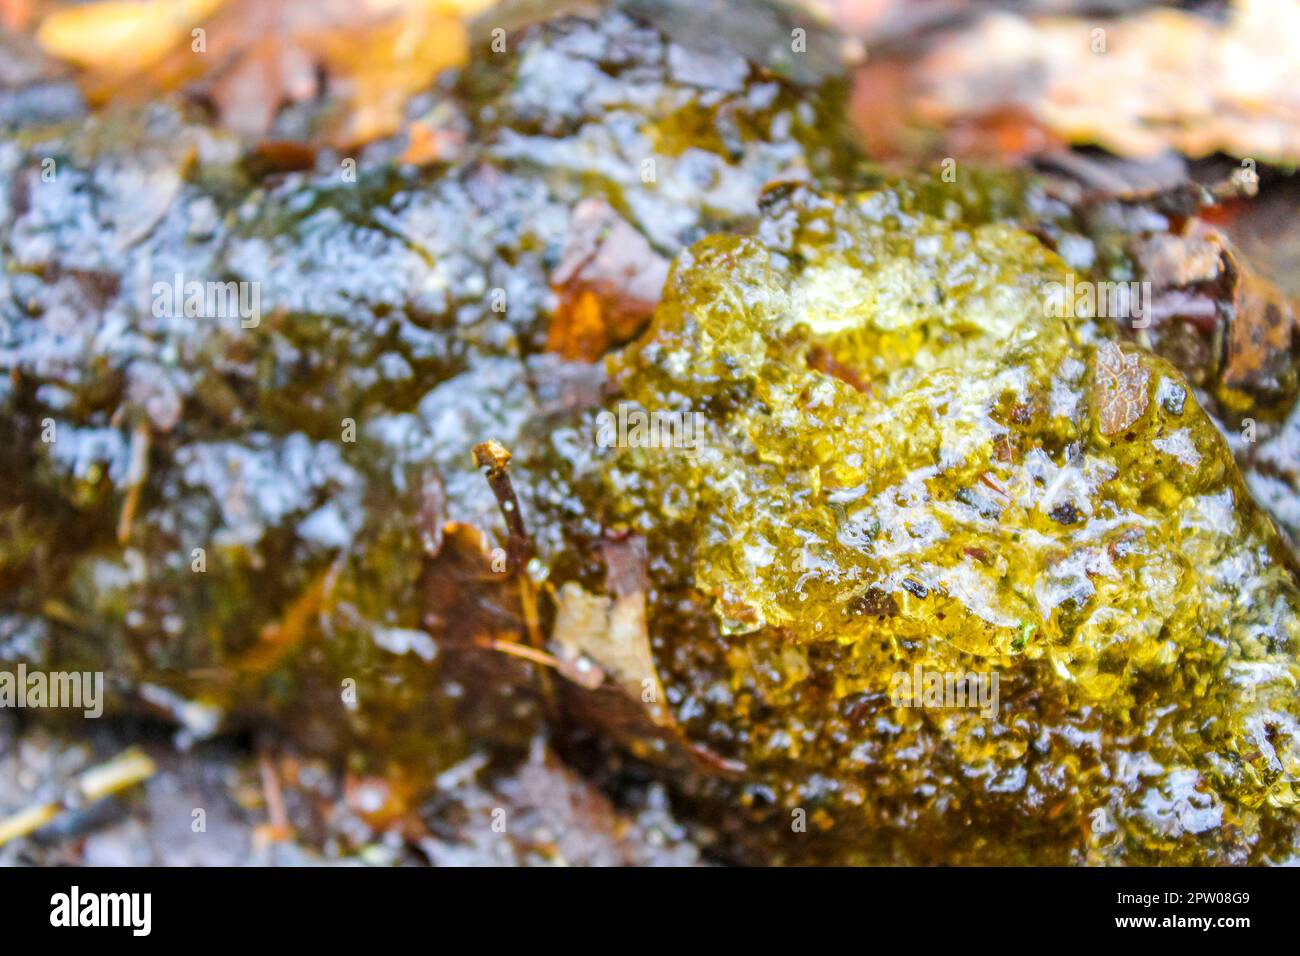 Green yellow angular slime n Drangstedt forest in Geestland Cuxhaven Lower Saxony Germany. Stock Photo